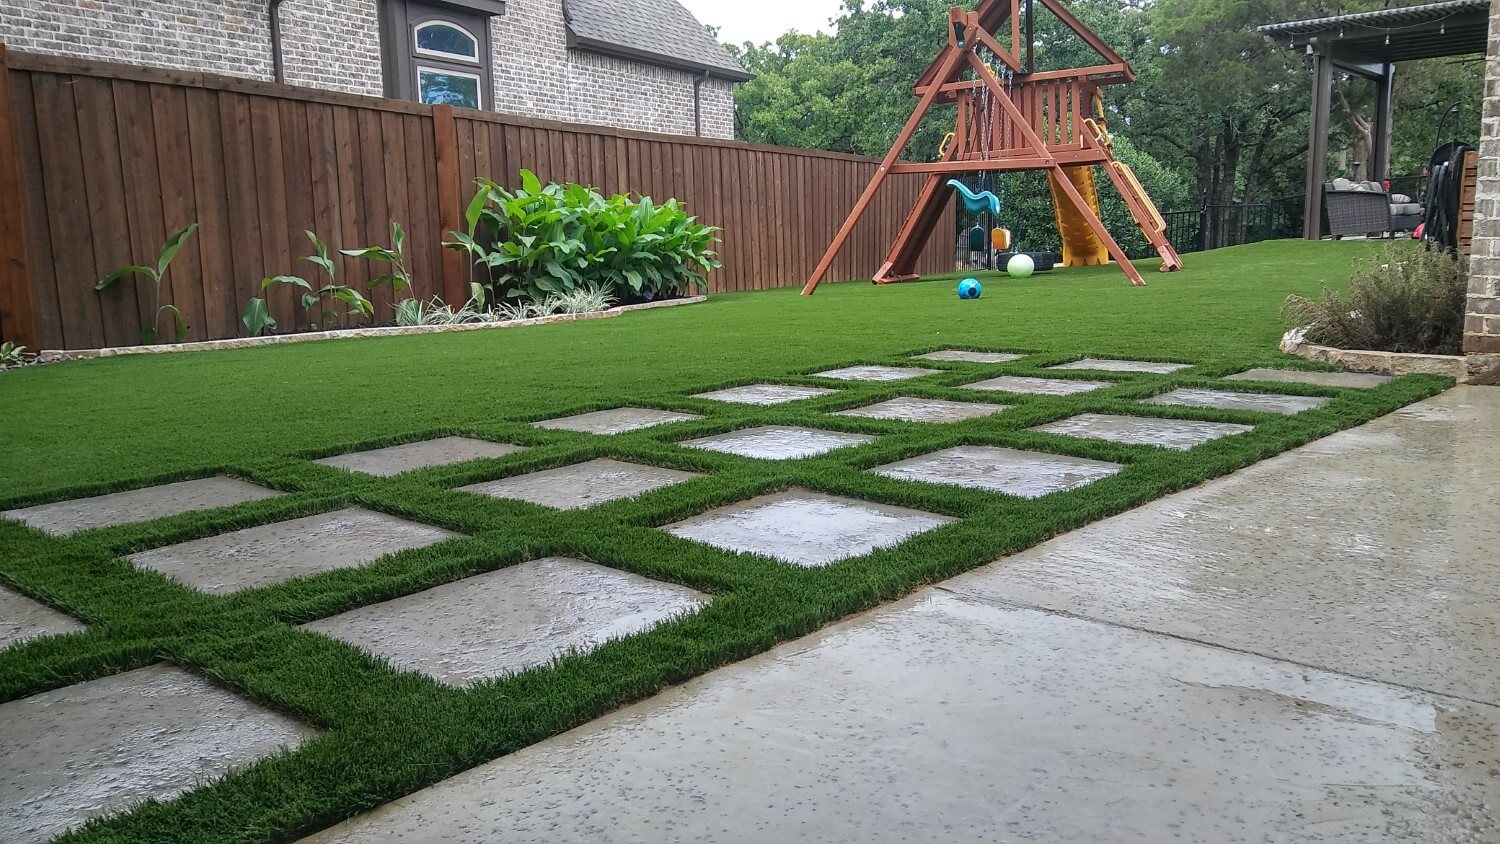 Artificial grass backyard playground from SYNLawn